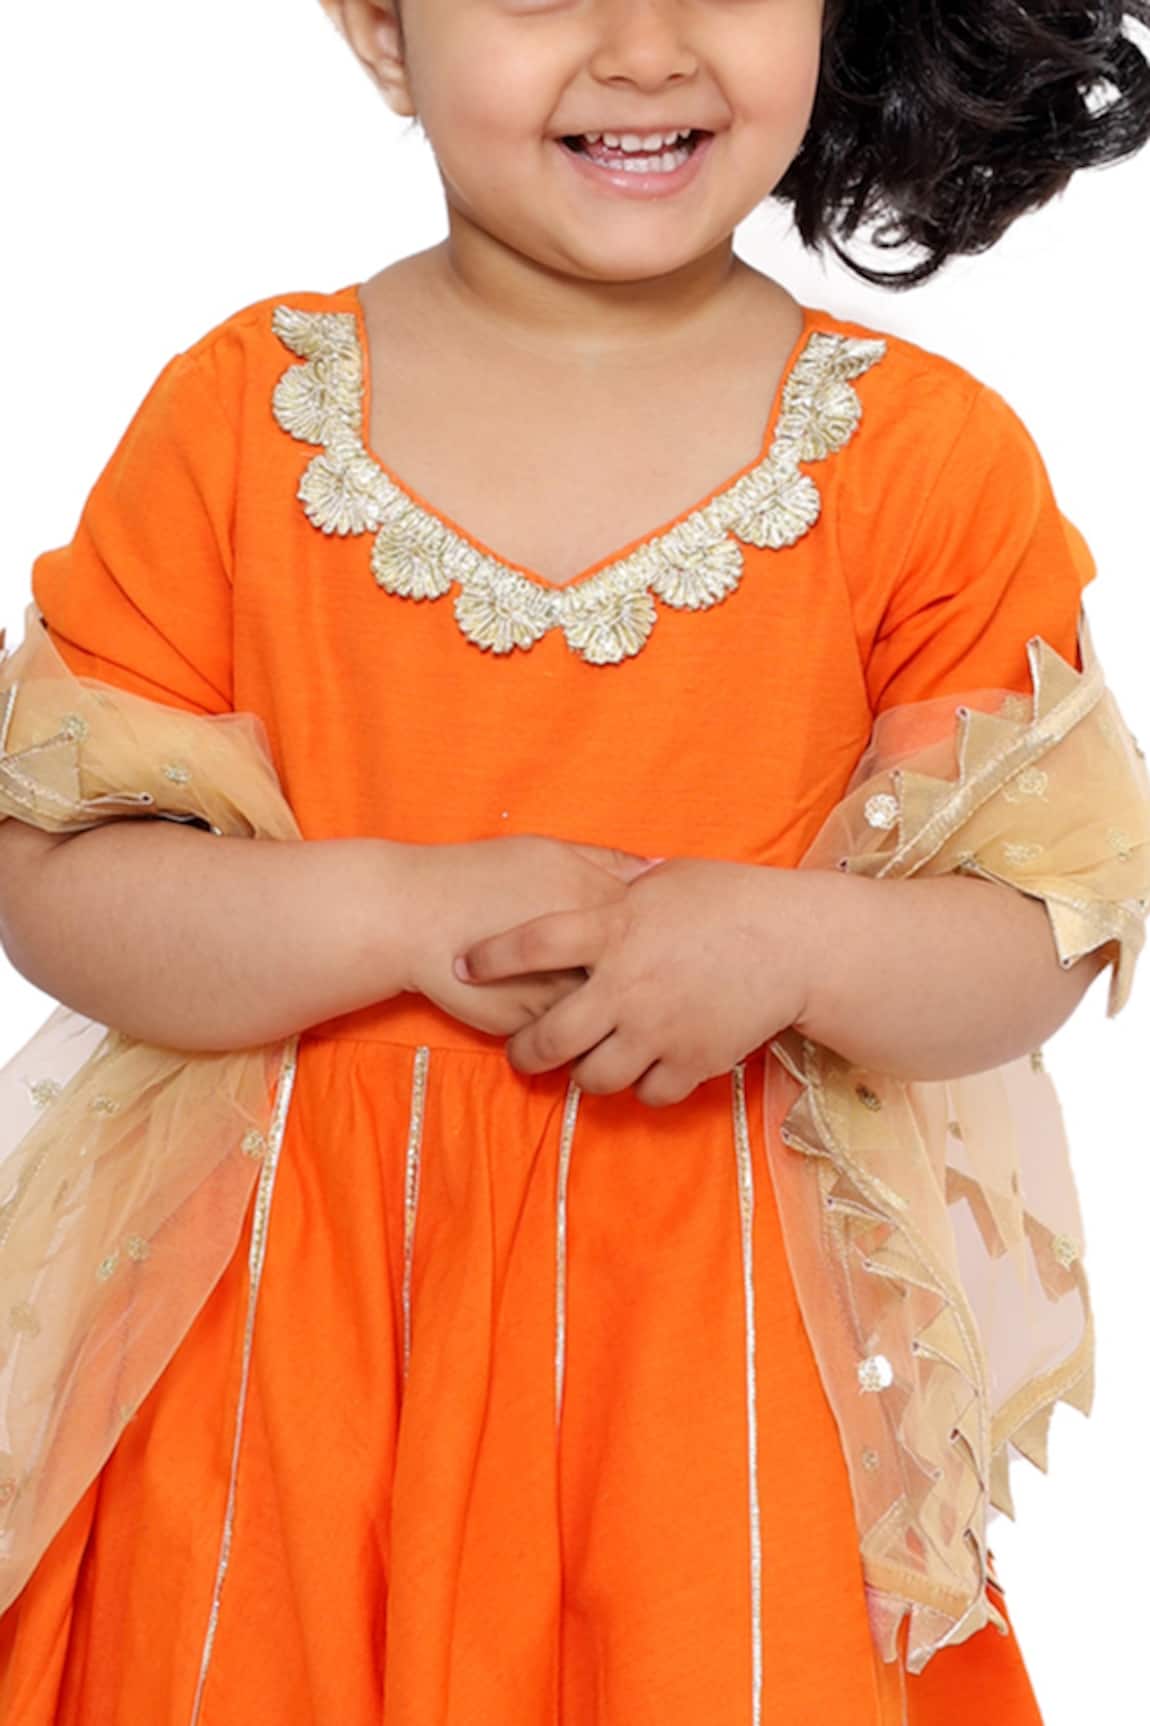 Orange Solid Color Dhoti Harem Pants for Girls  Women  Zubix  Clothing  Accessories and Home Furnishing Shop Online